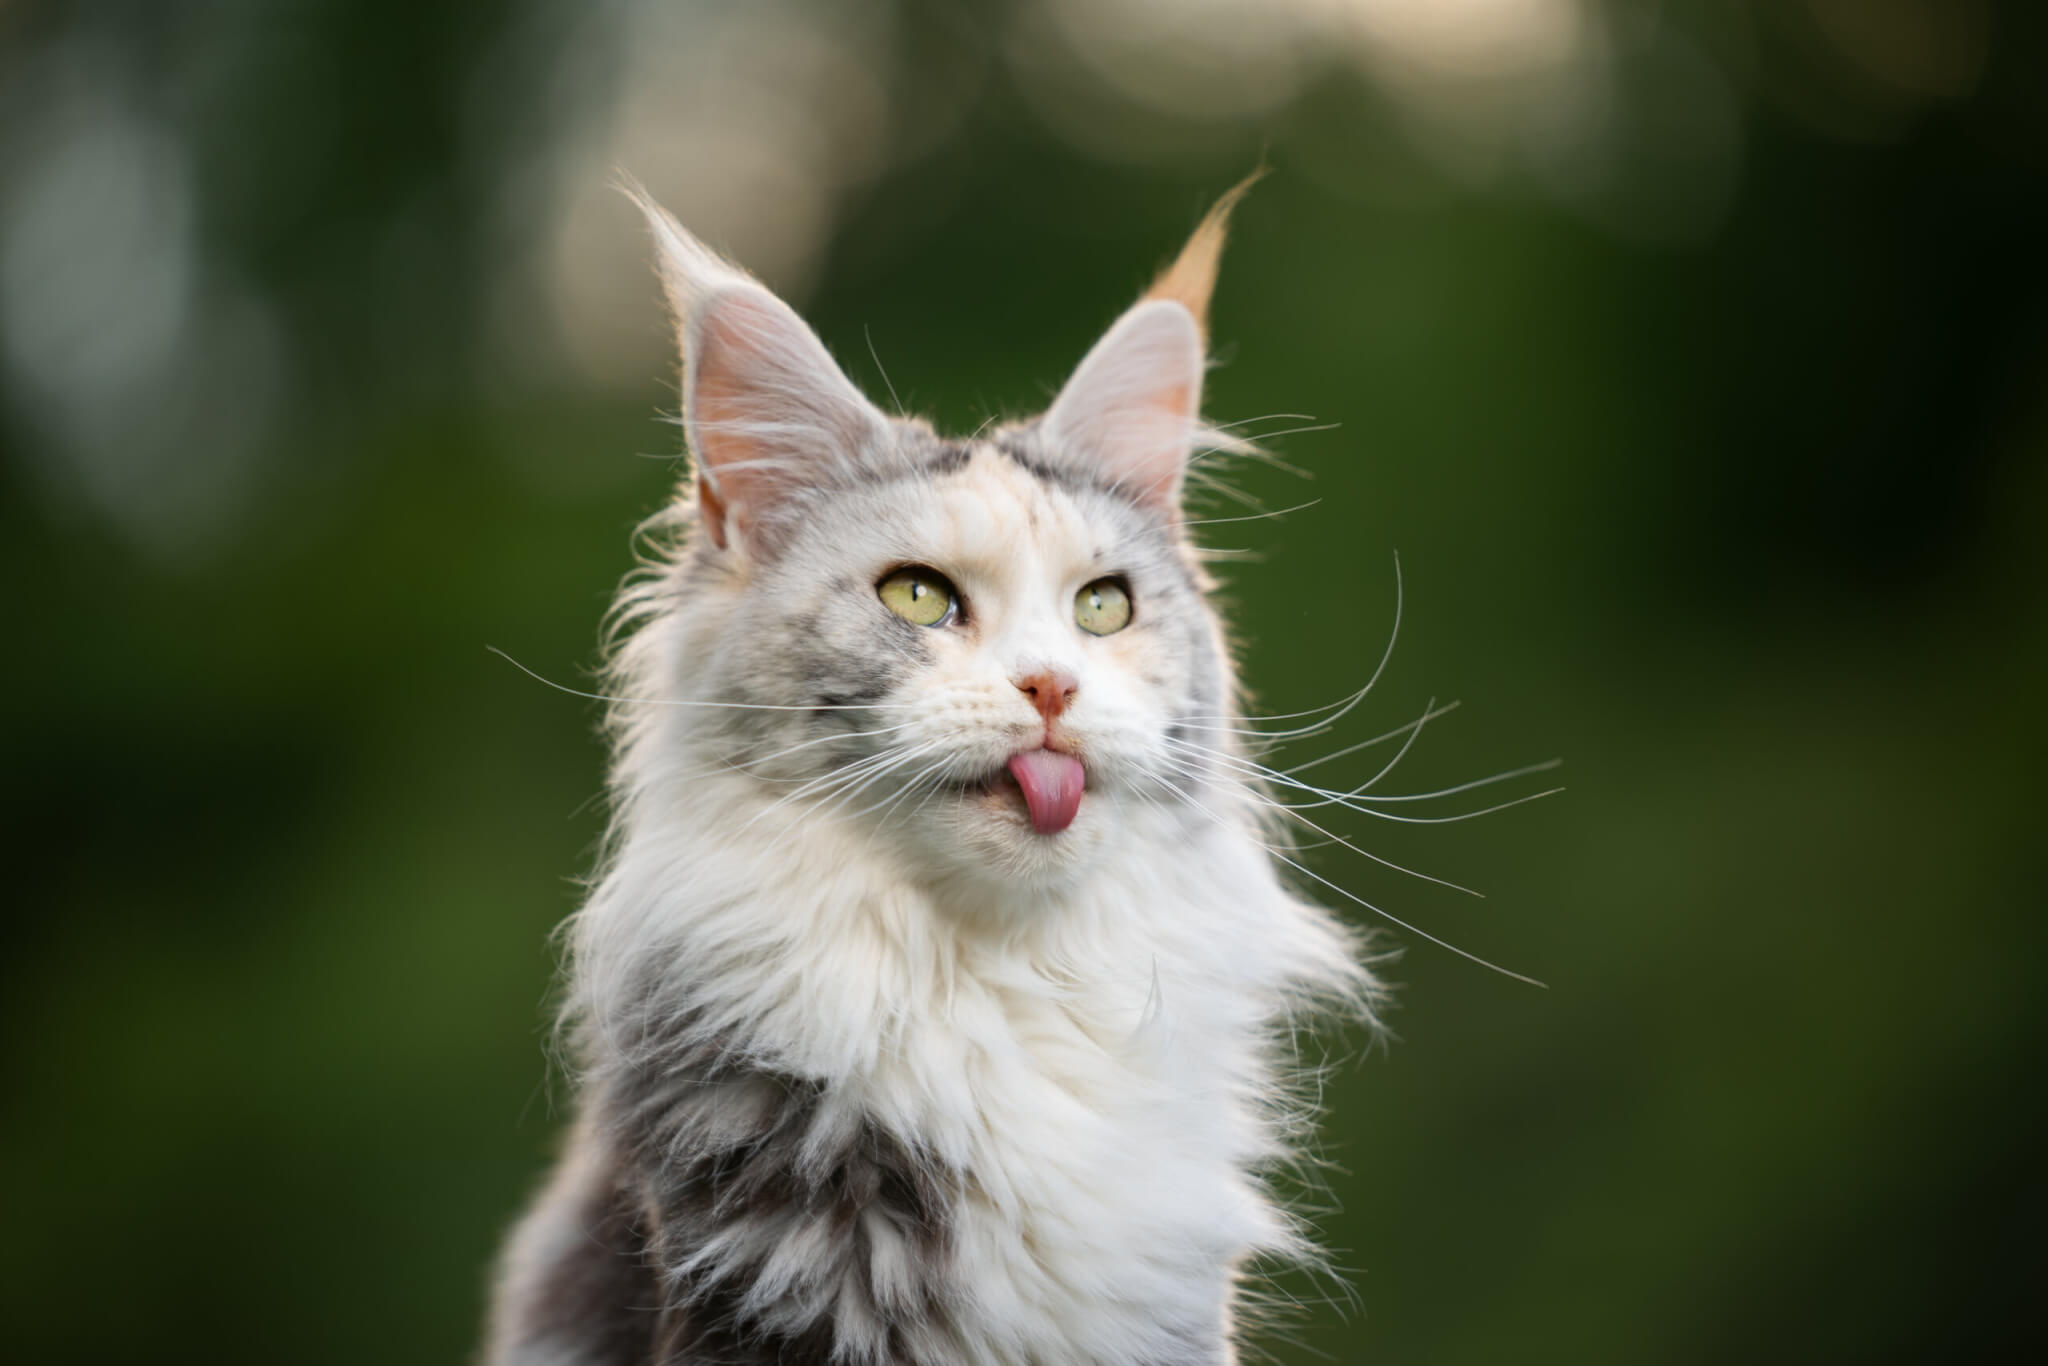 A white outdoor Maine Coon cat